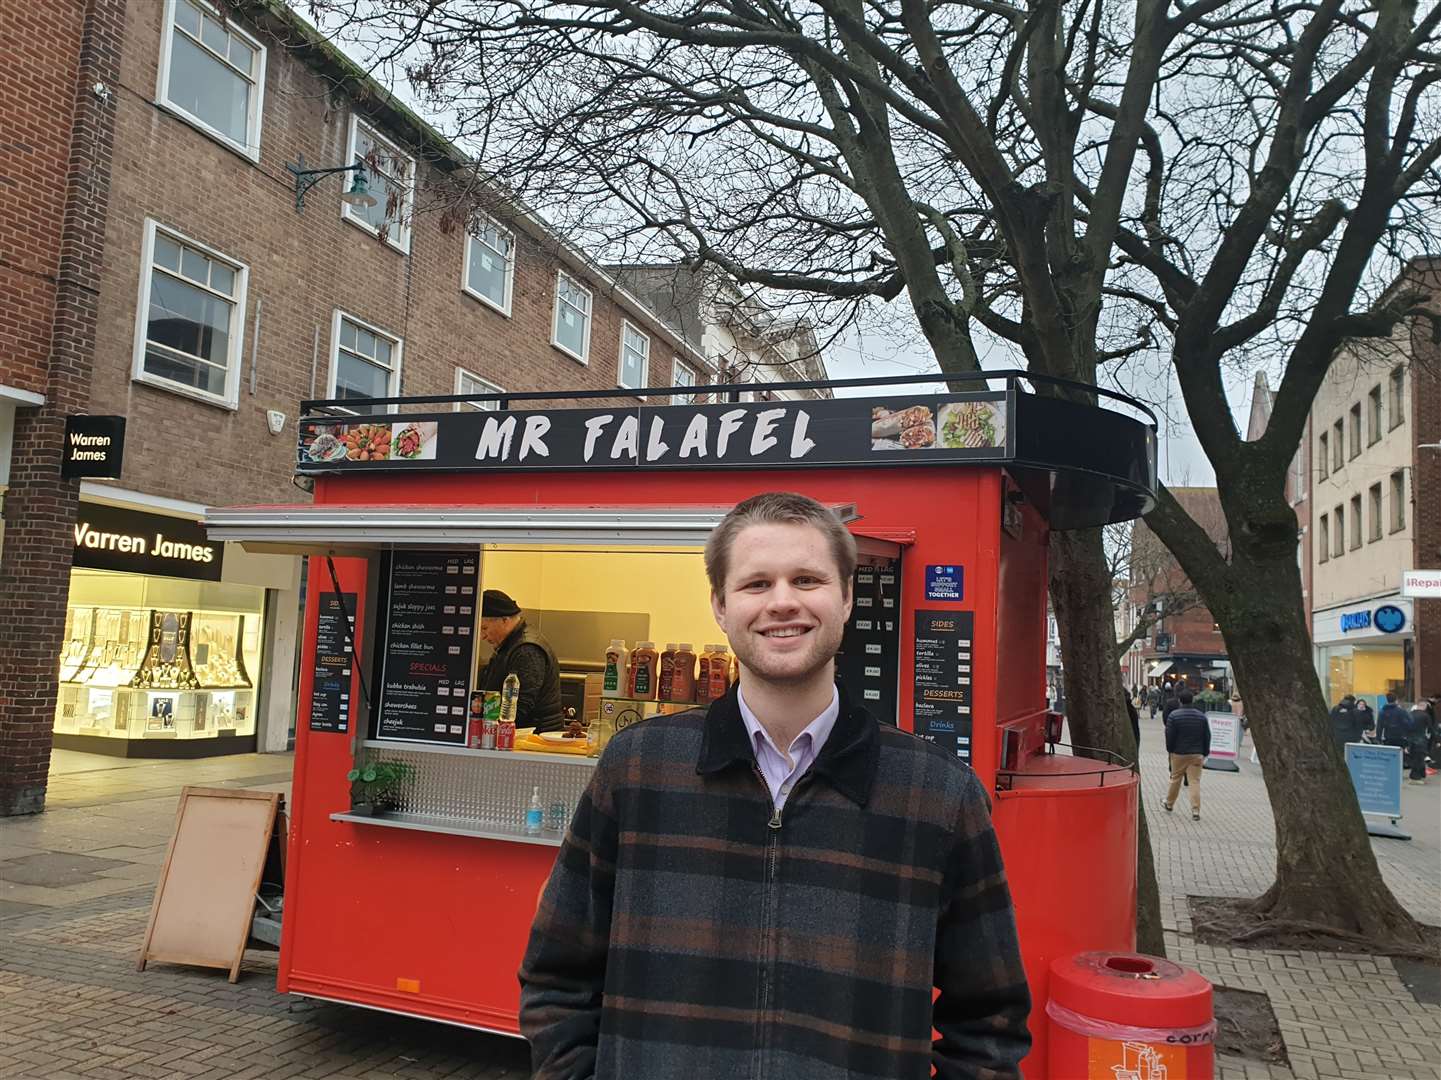 Our reporter Jack Dyson visited Mr Falafel in Canterbury this week